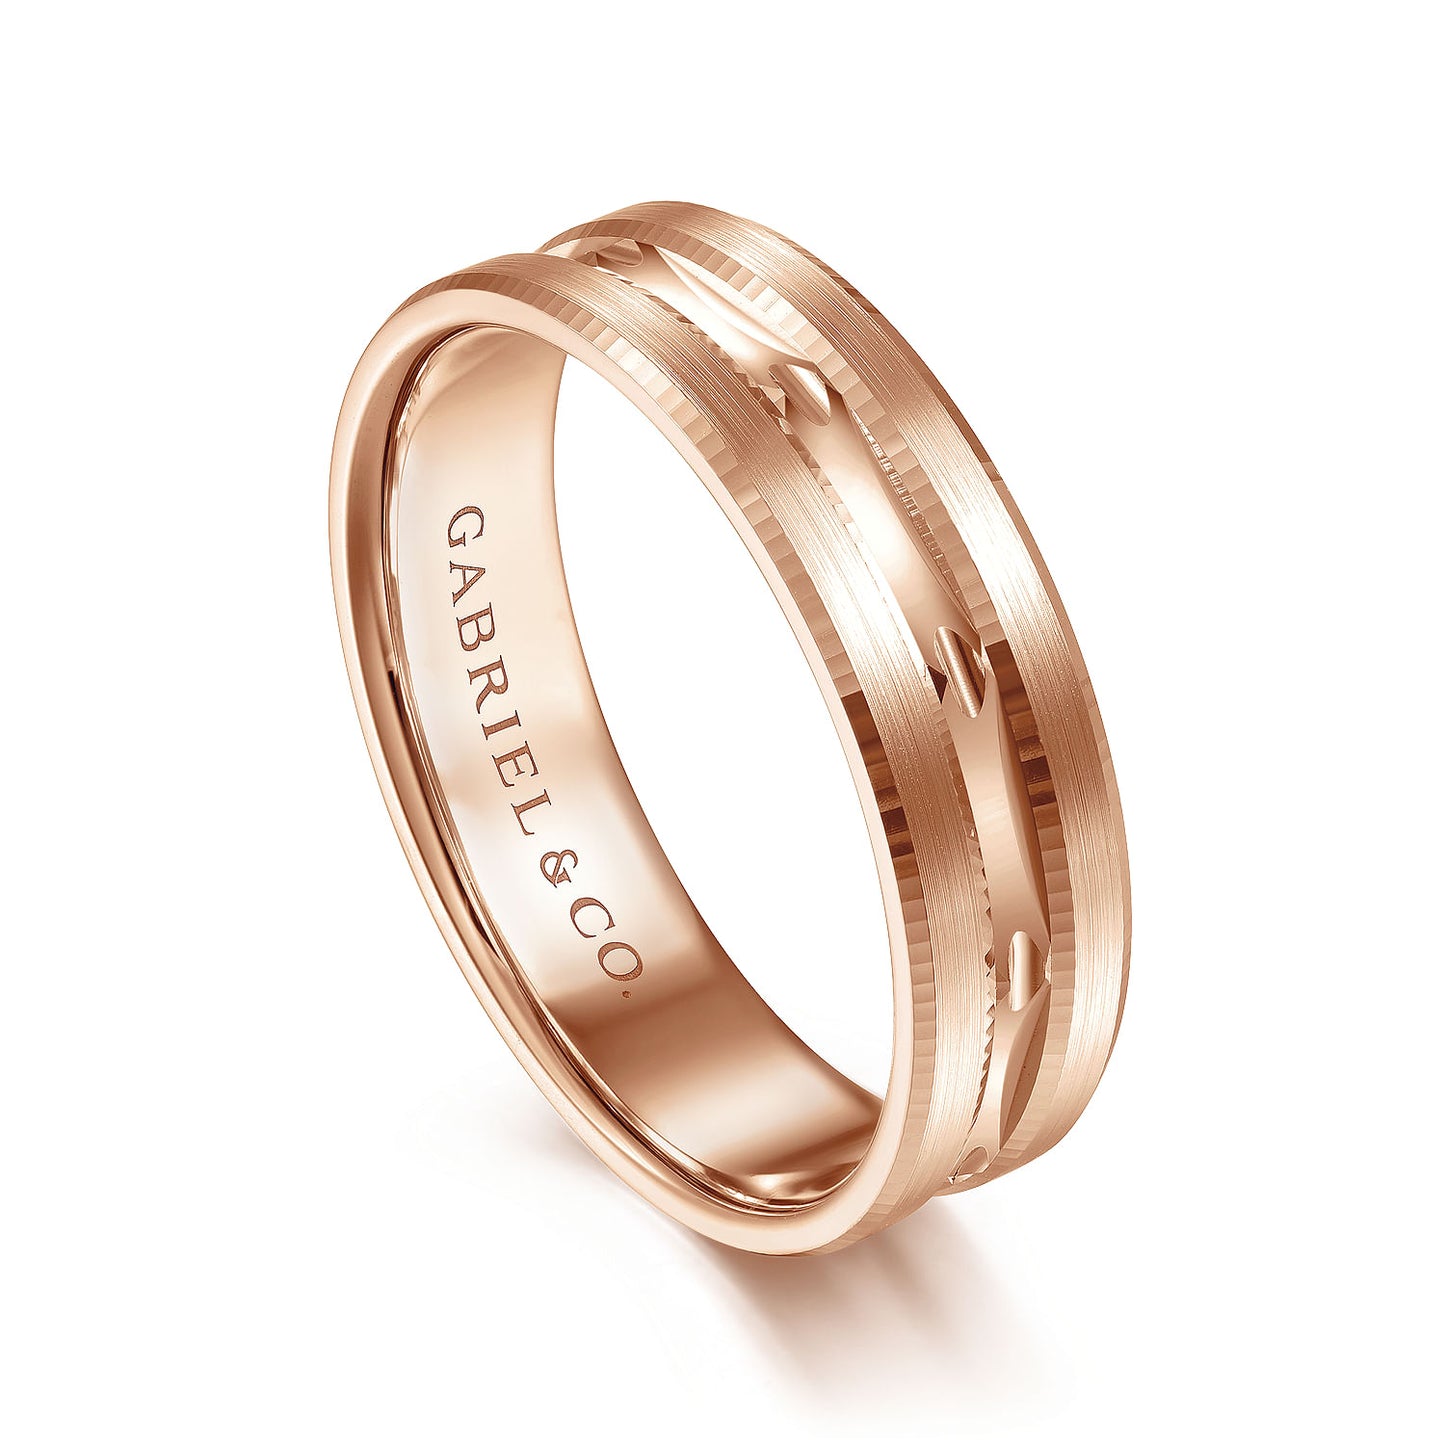 Gabriel & Co Rose Gold Wedding Band With Diamond Cut Design Center And A Satin Finish - Gold Wedding Bands - Men's